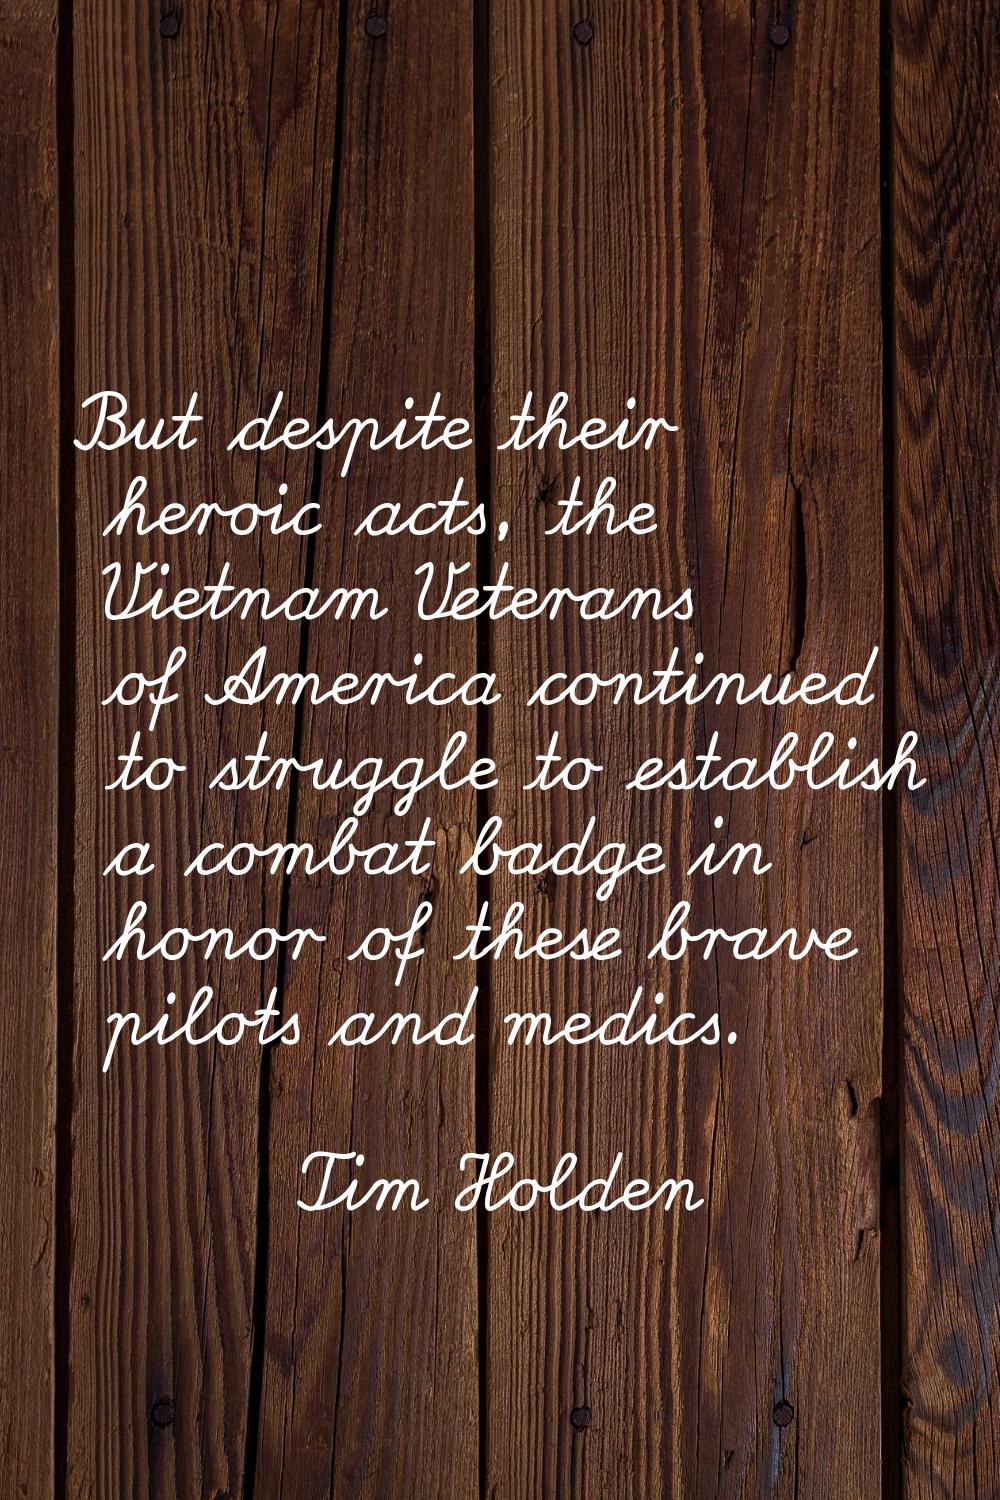 But despite their heroic acts, the Vietnam Veterans of America continued to struggle to establish a